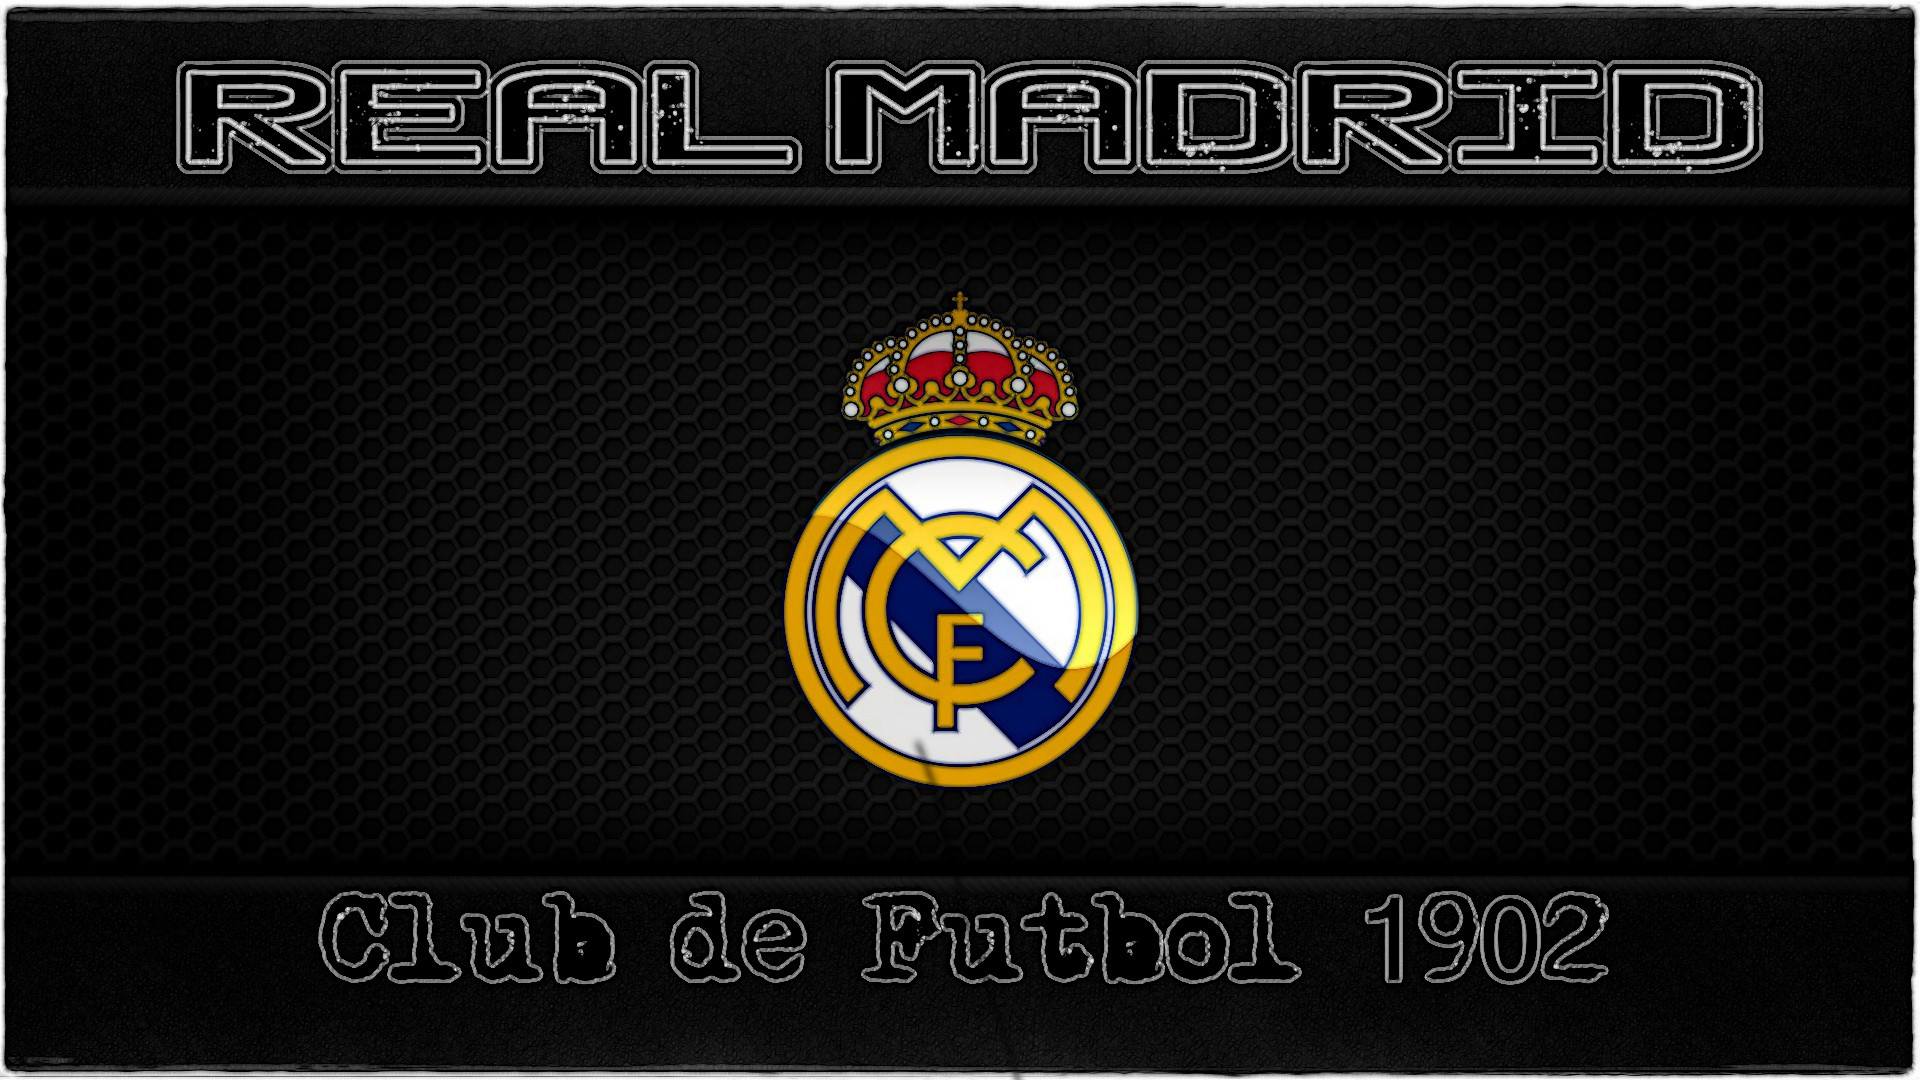 General 1920x1080 sport Real Madrid soccer clubs logo 1902 (Year)